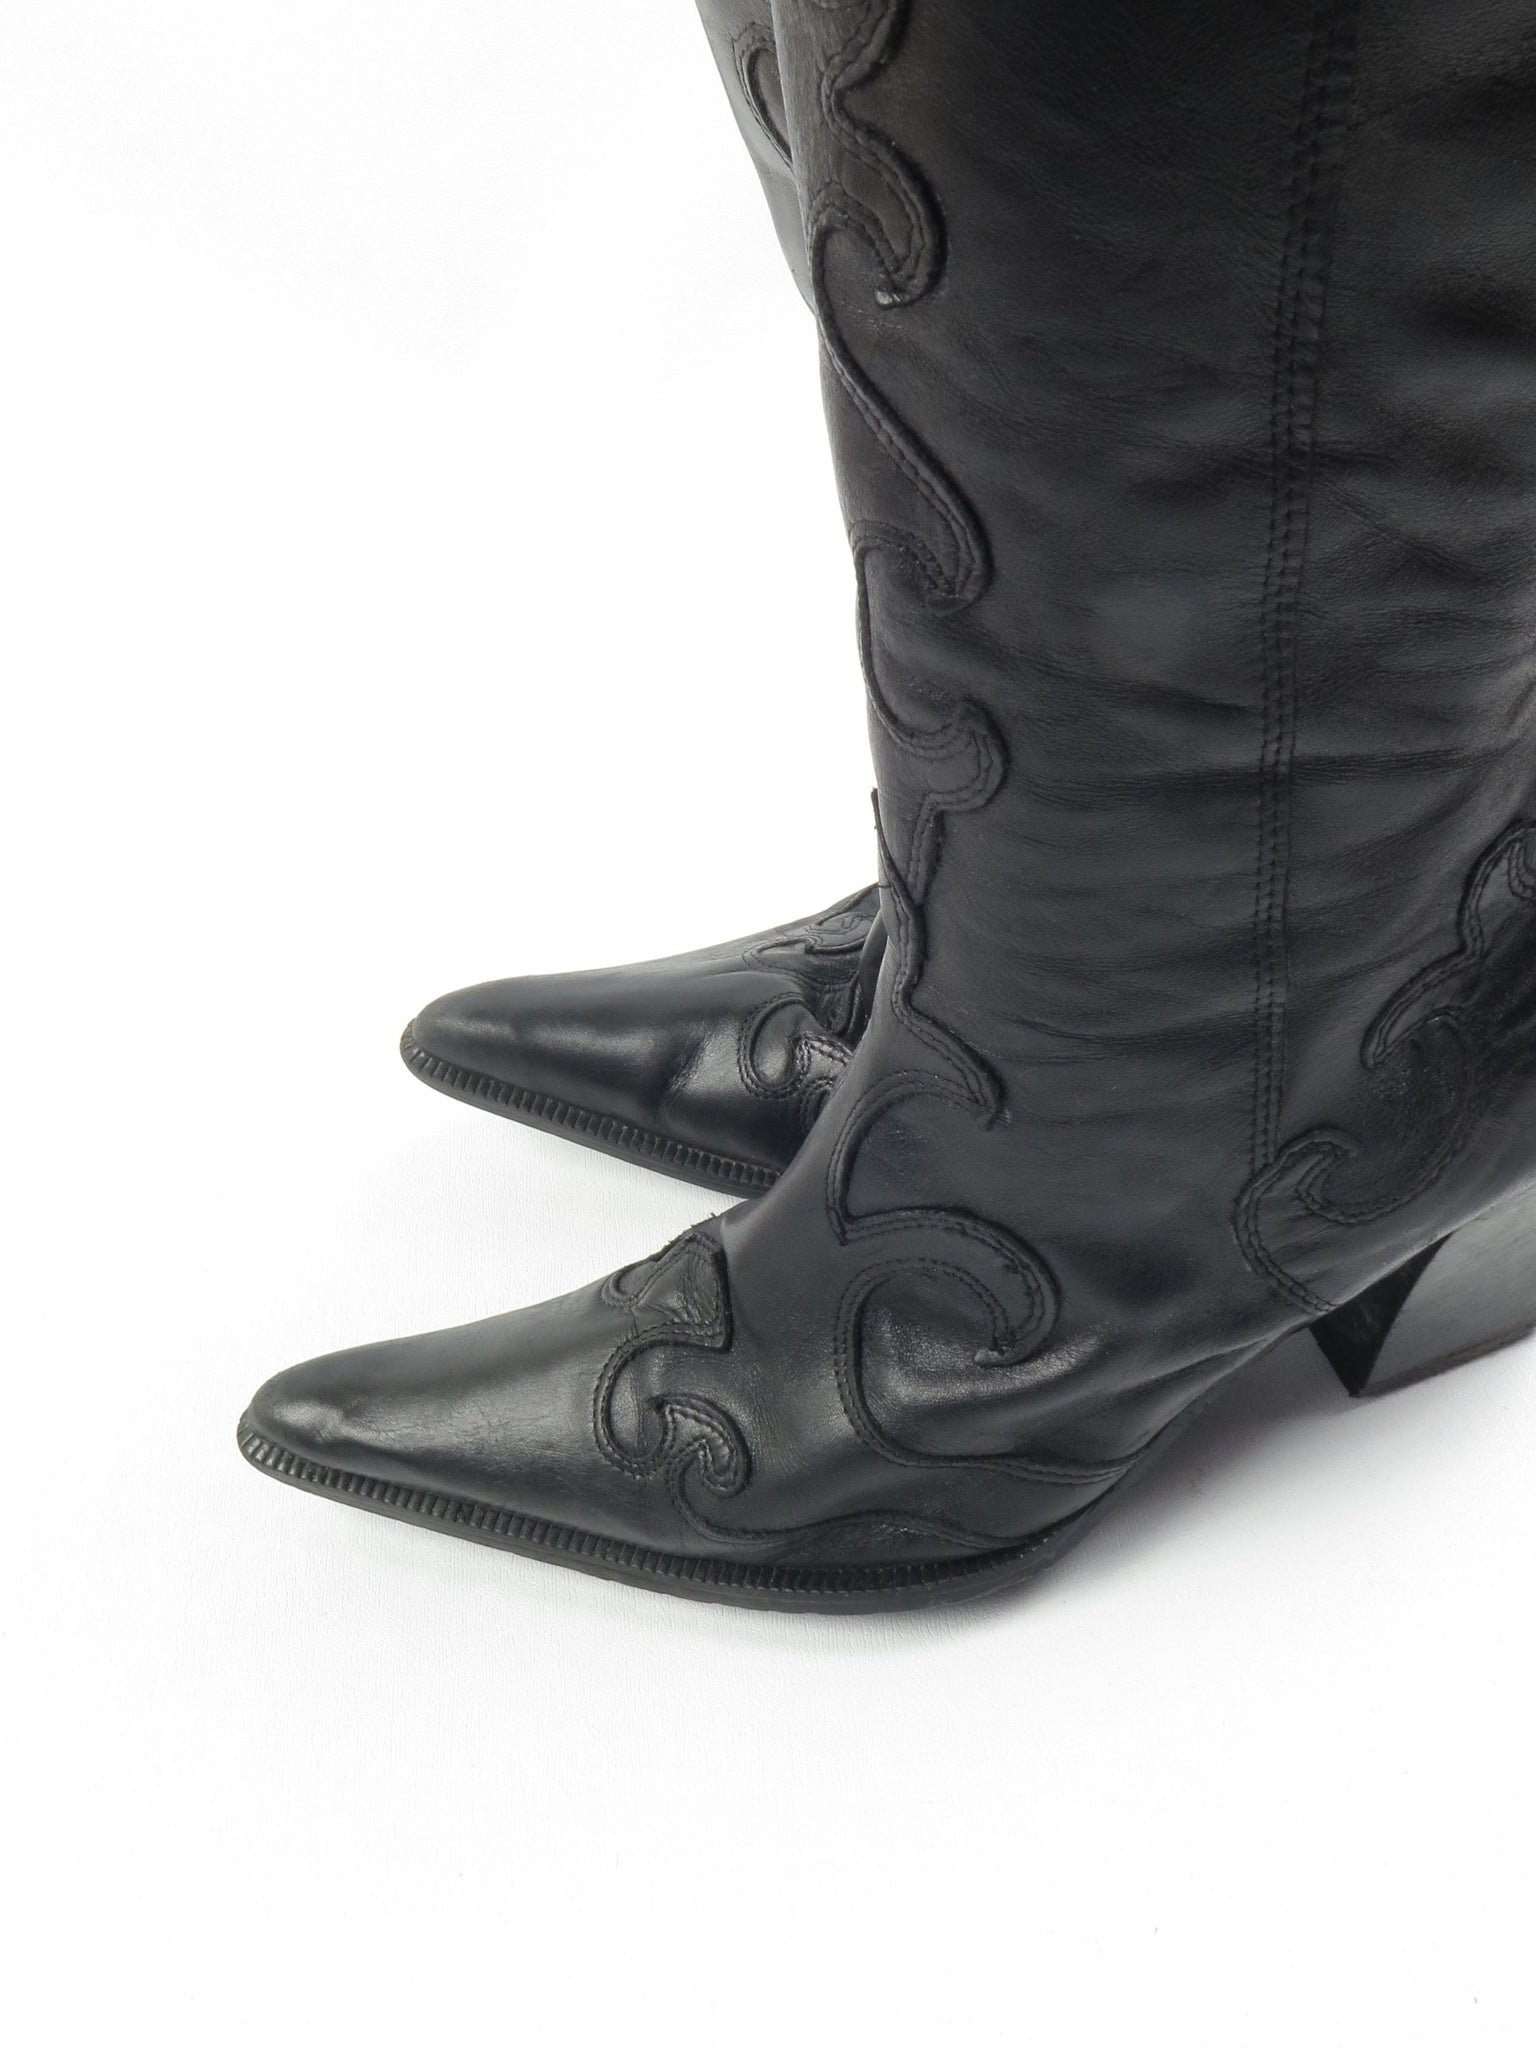 Women's Black Leather Cowboy Style Boots 37/4 - The Harlequin